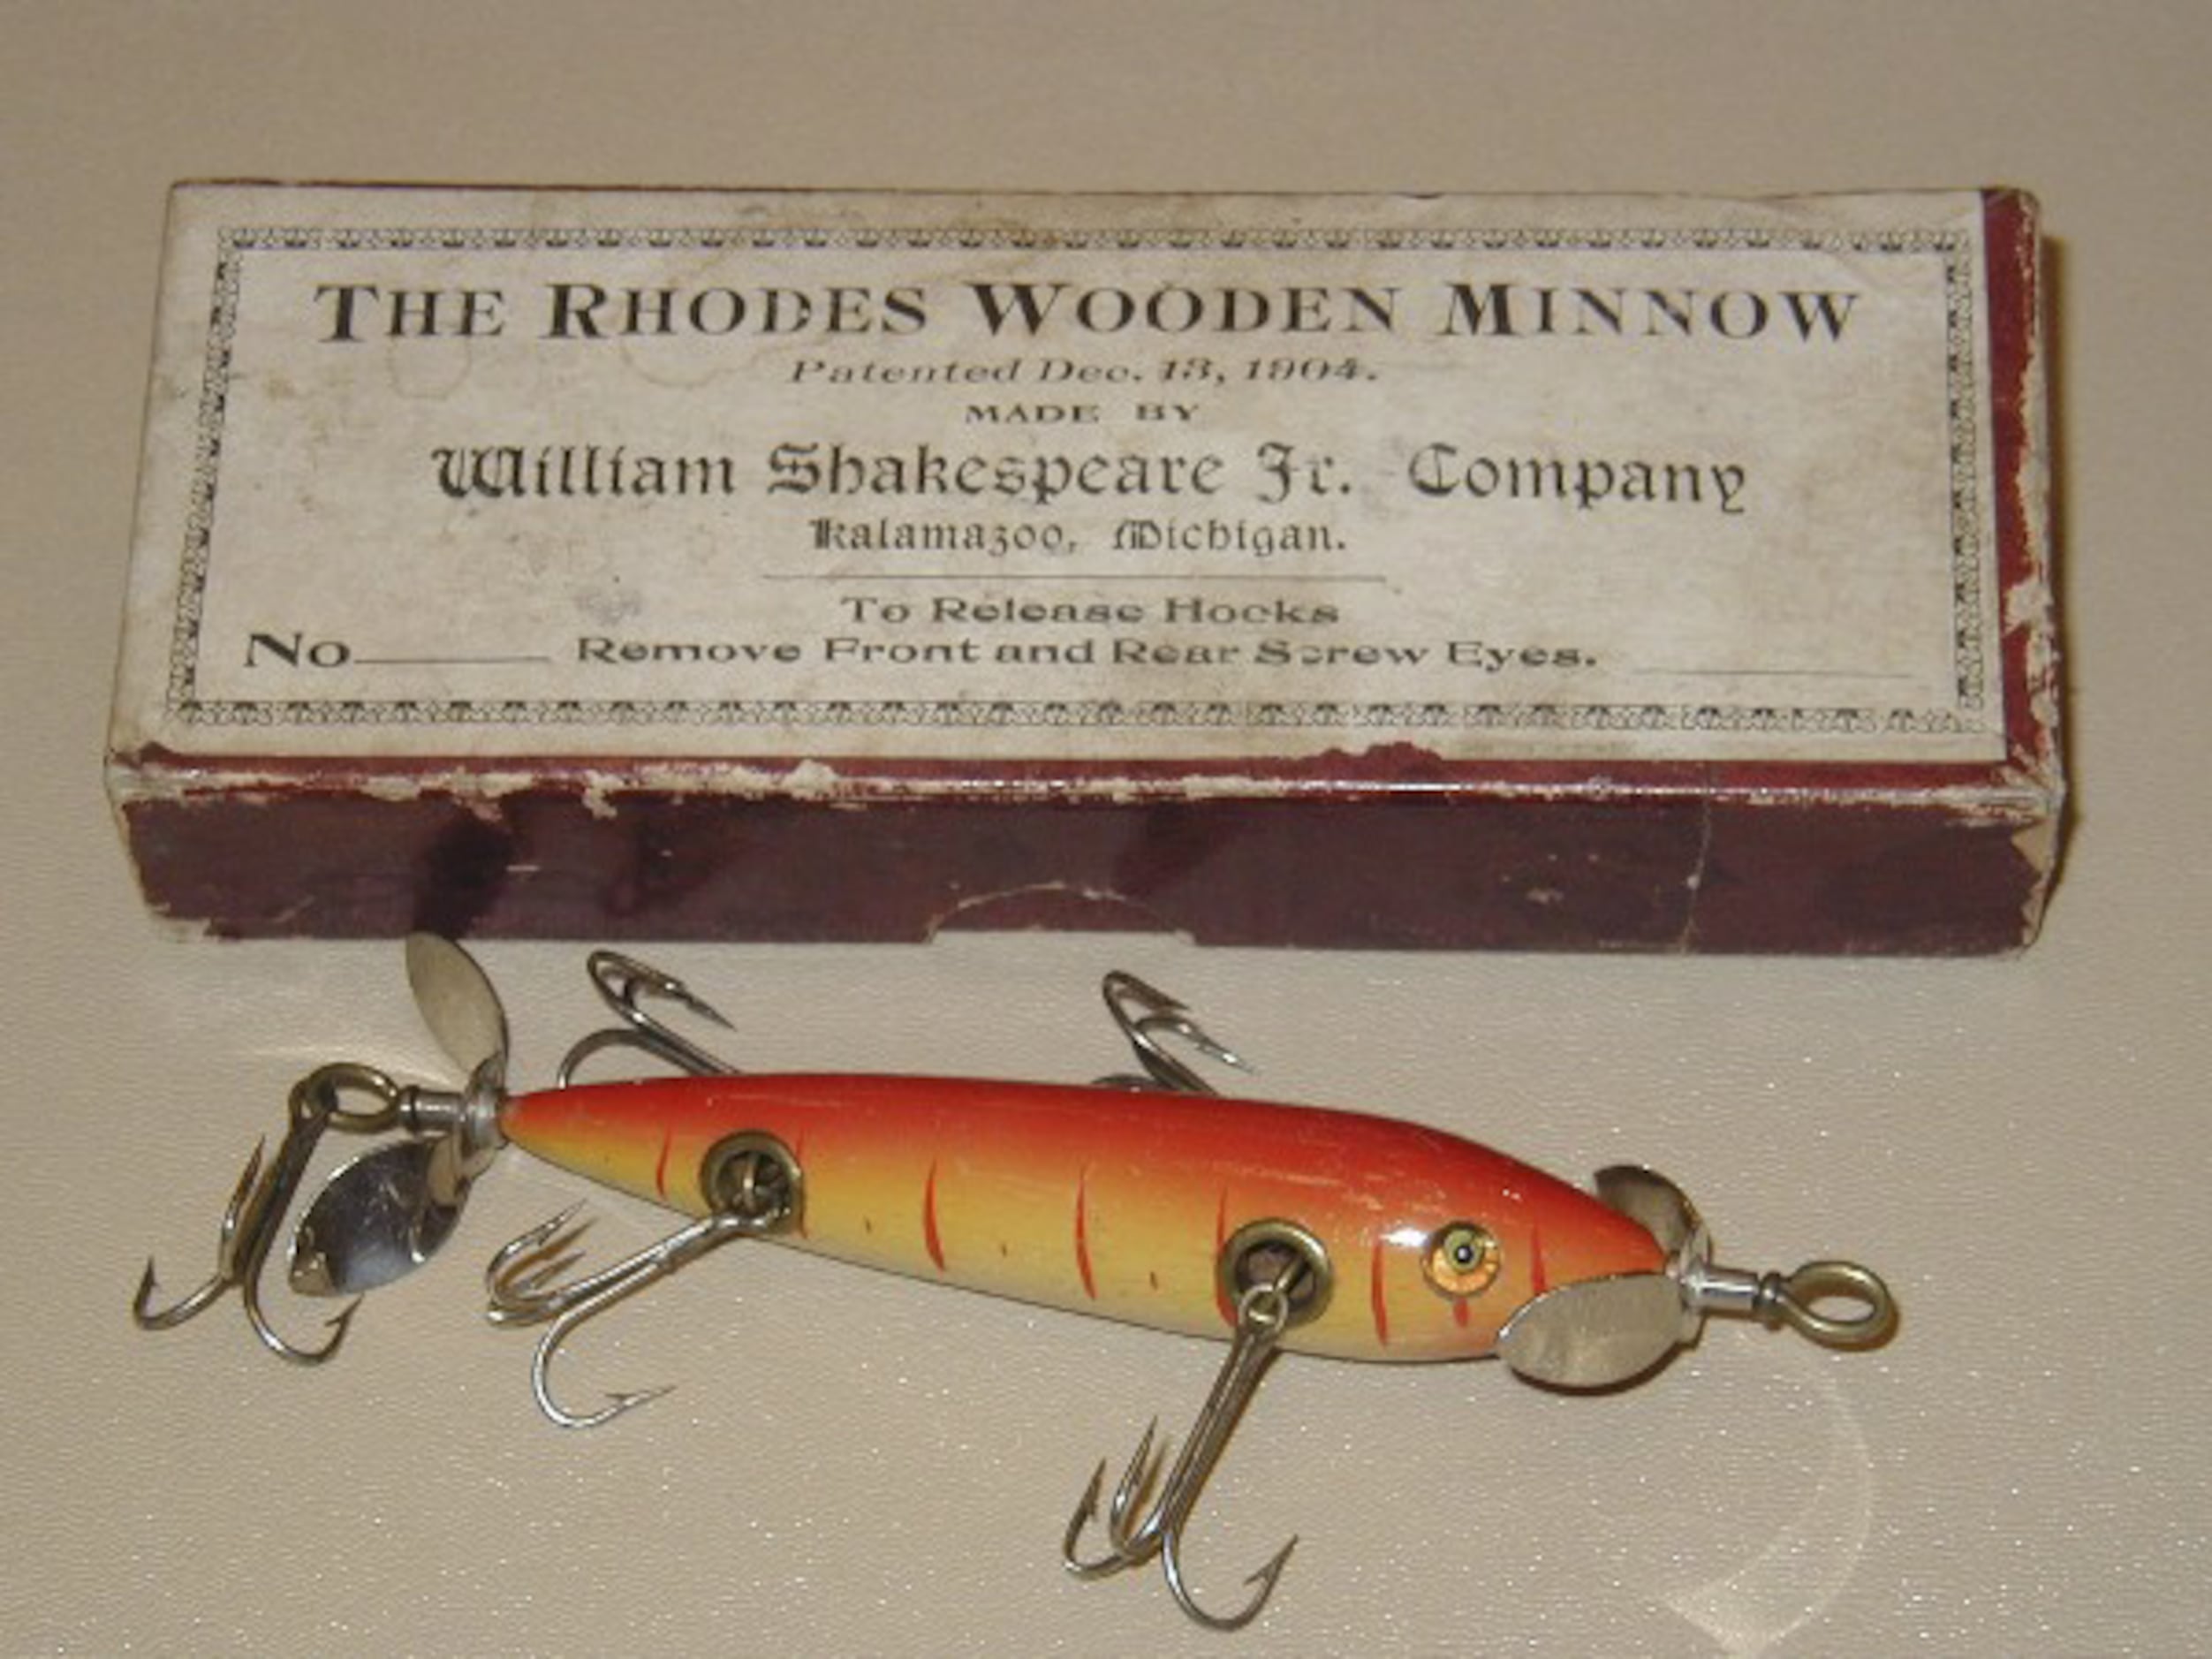 3 Vintage Bomber Fishing Lure With Original Box and Papers